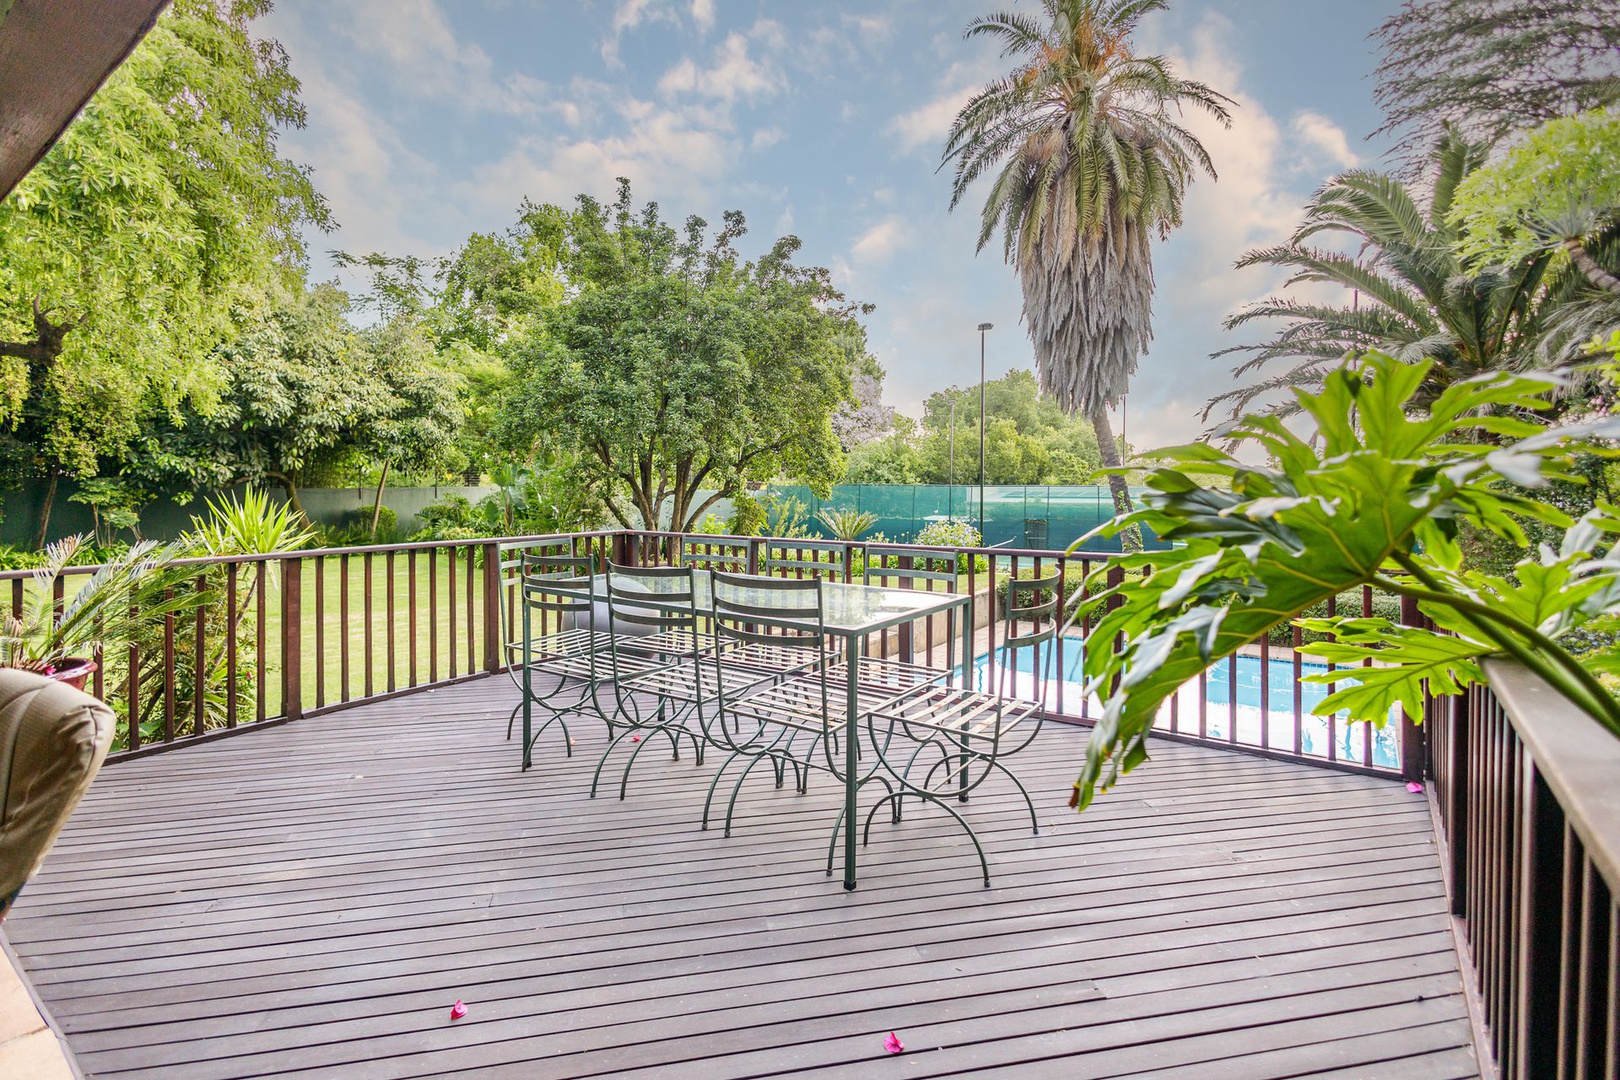 House in Craighall Park - Deck